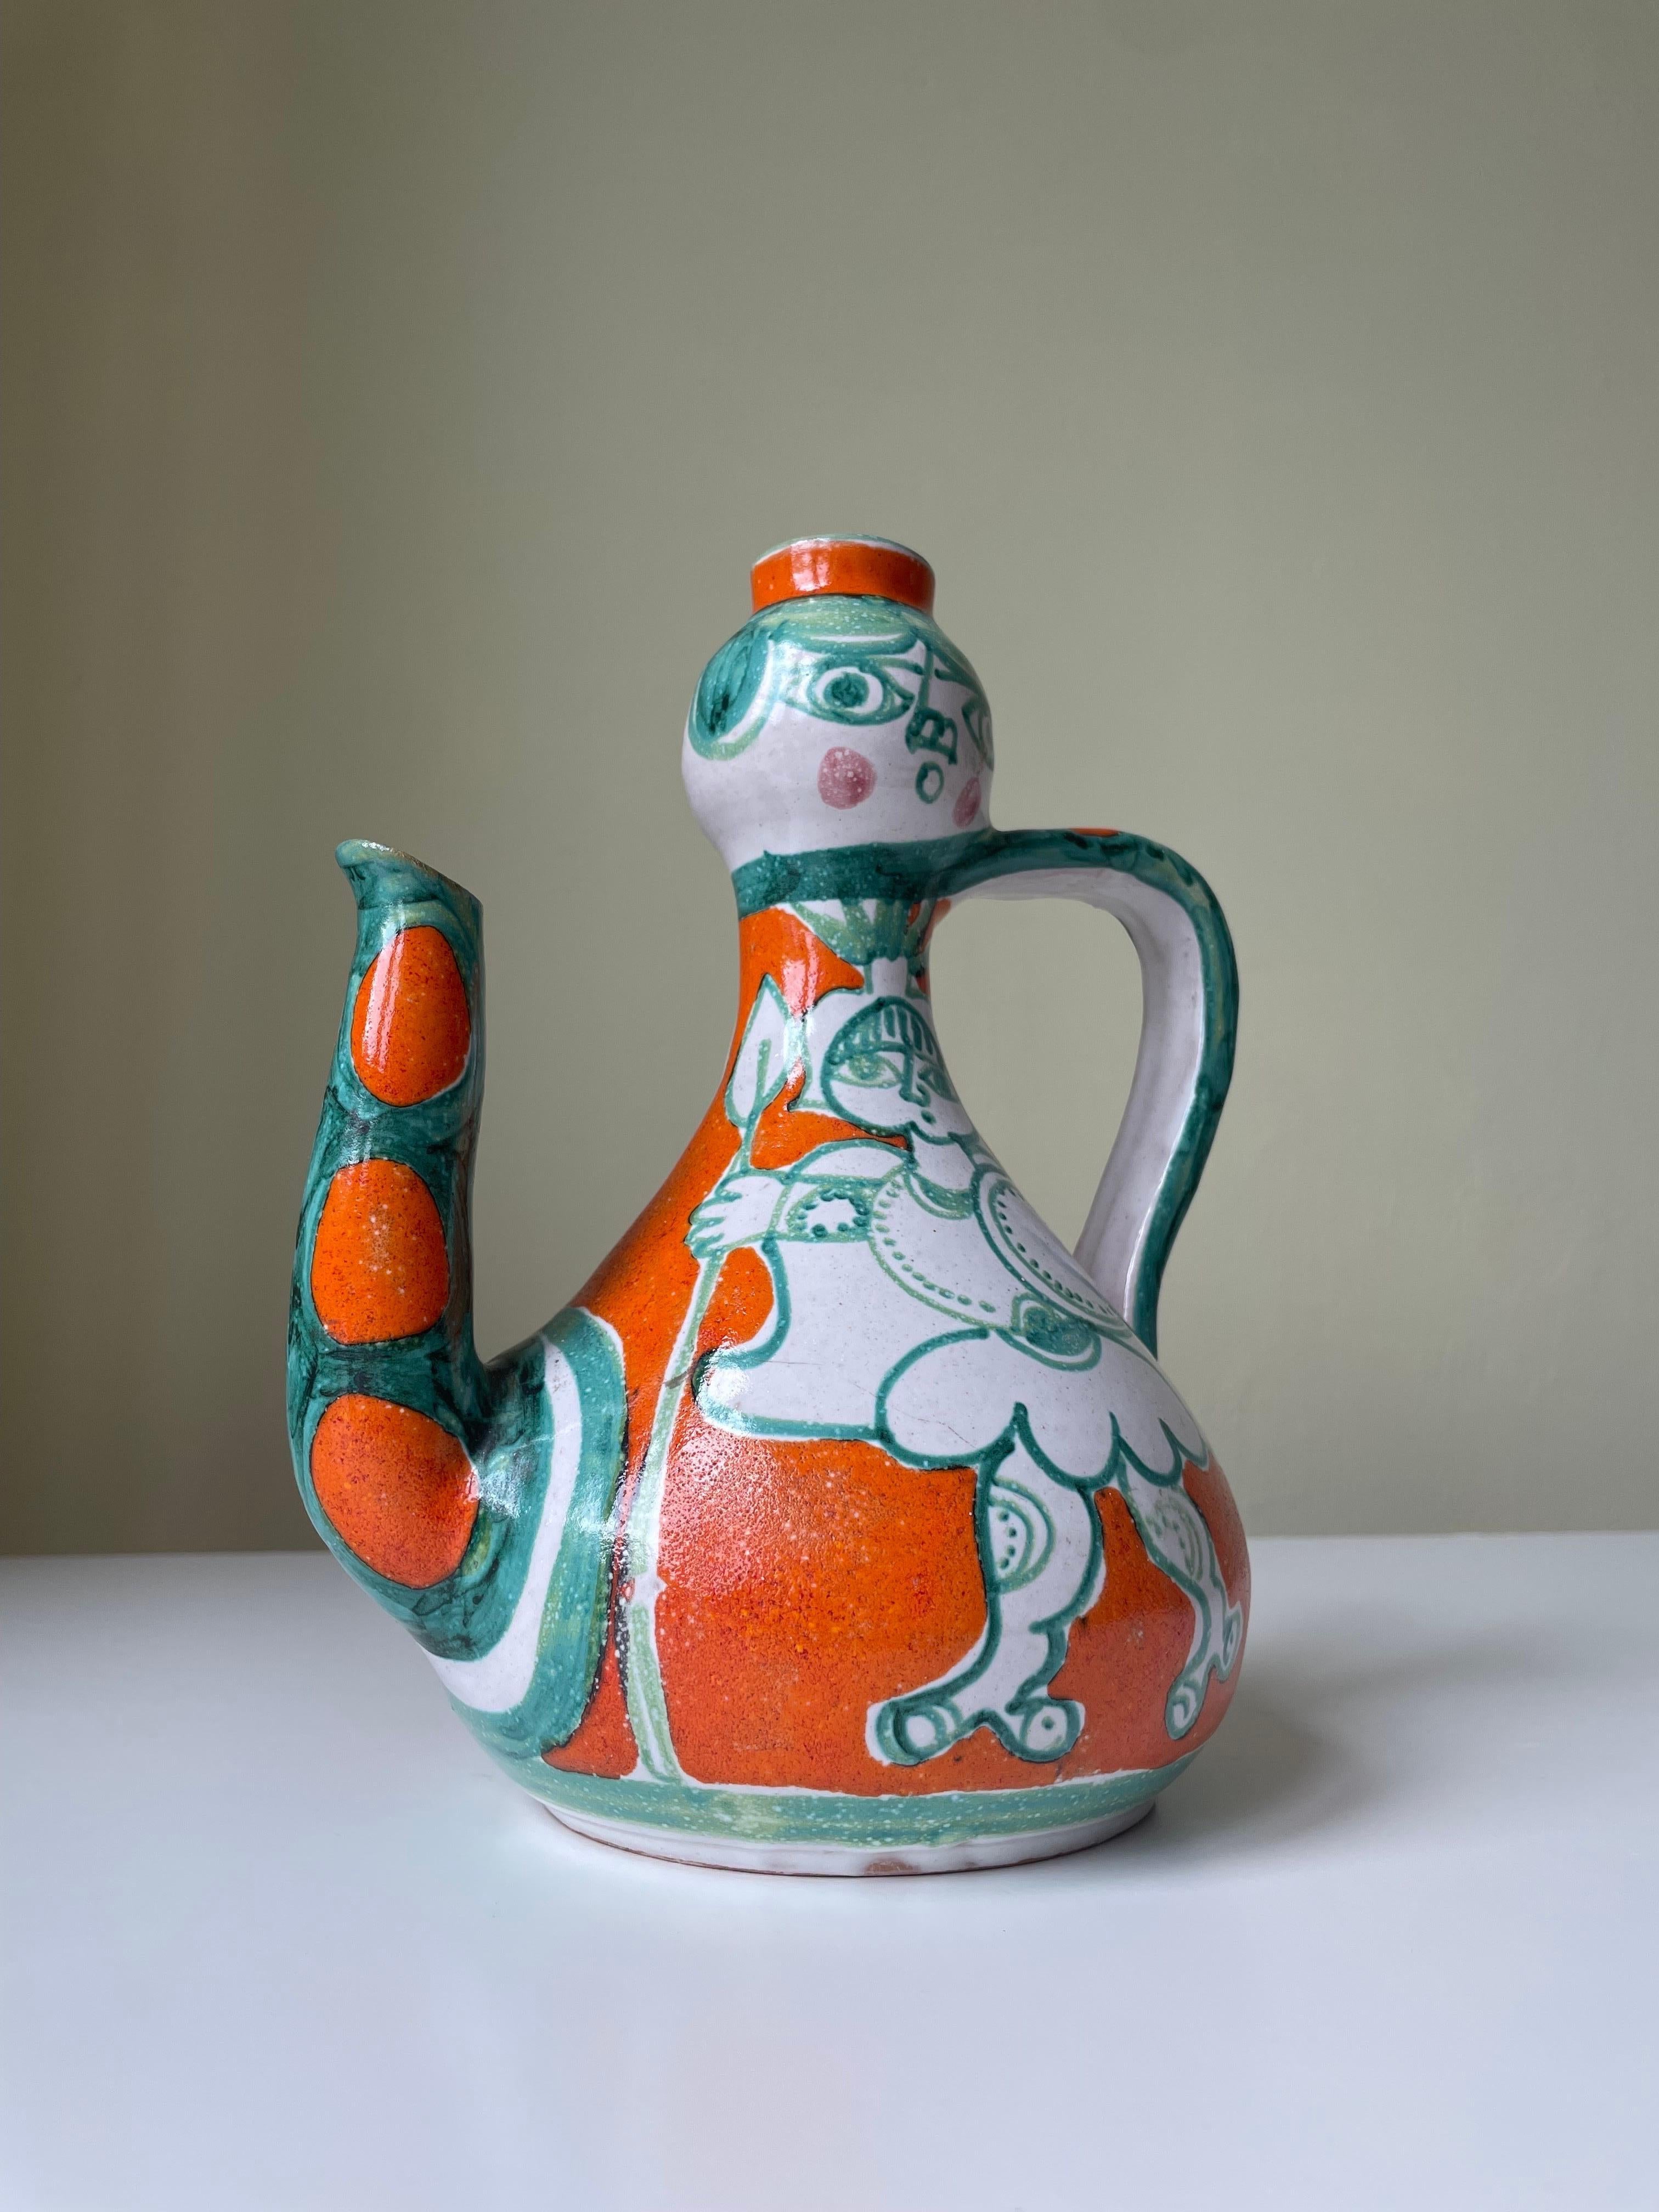 Sicilian soft shaped ceramic bottle pitcher vase with handle and spout designed and handmade by ceramic artist Giovanni De Simone (1930-1991) in 1964. De Simone studied under the direction of Pablo Picasso by whom he was highly inspired. The pitcher